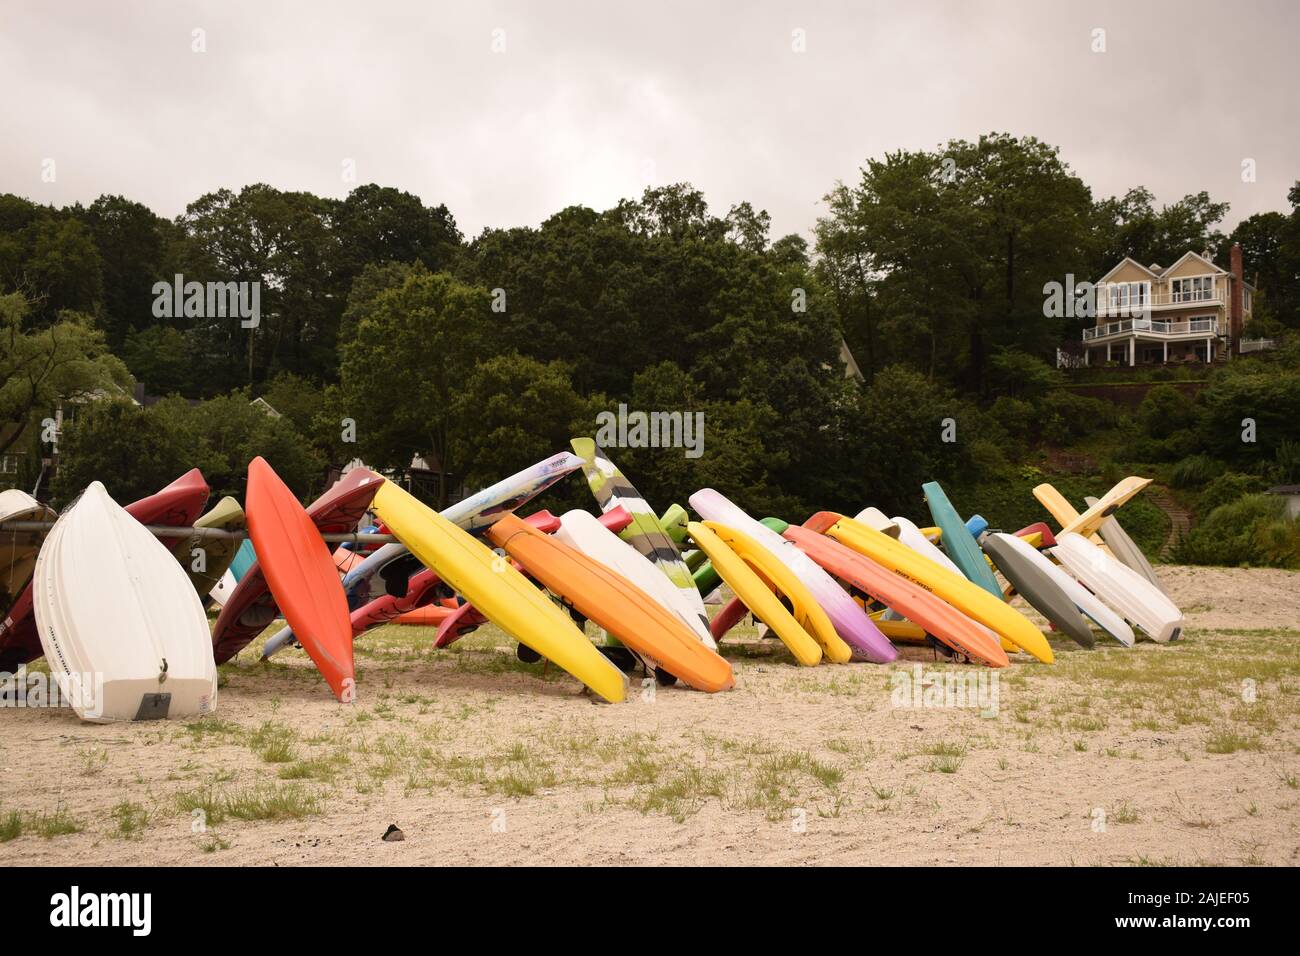 A group of kayak, rowboats and stand up paddleboards lined up on a rack at a rocky beach. Stock Photo